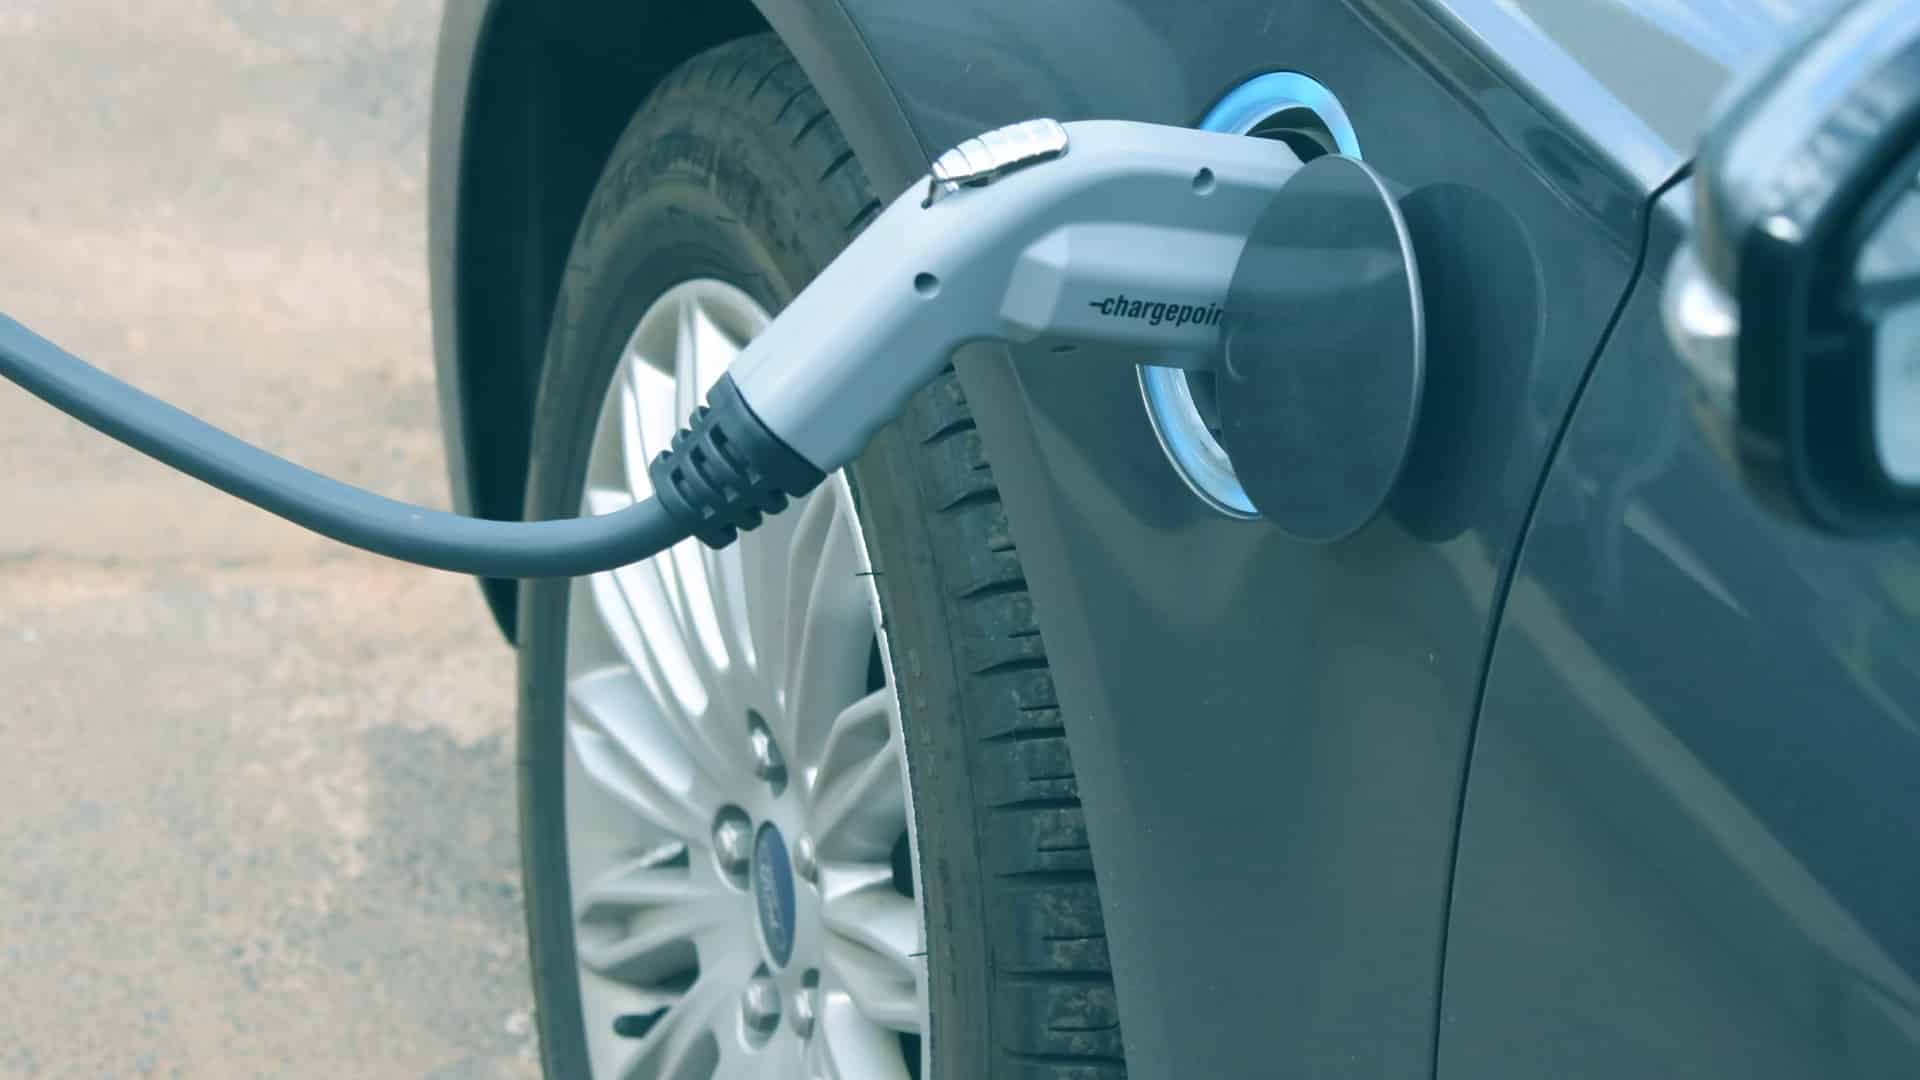 Hero Electric joins hands with Massive Mobility to set up 10,000 EV charging stations